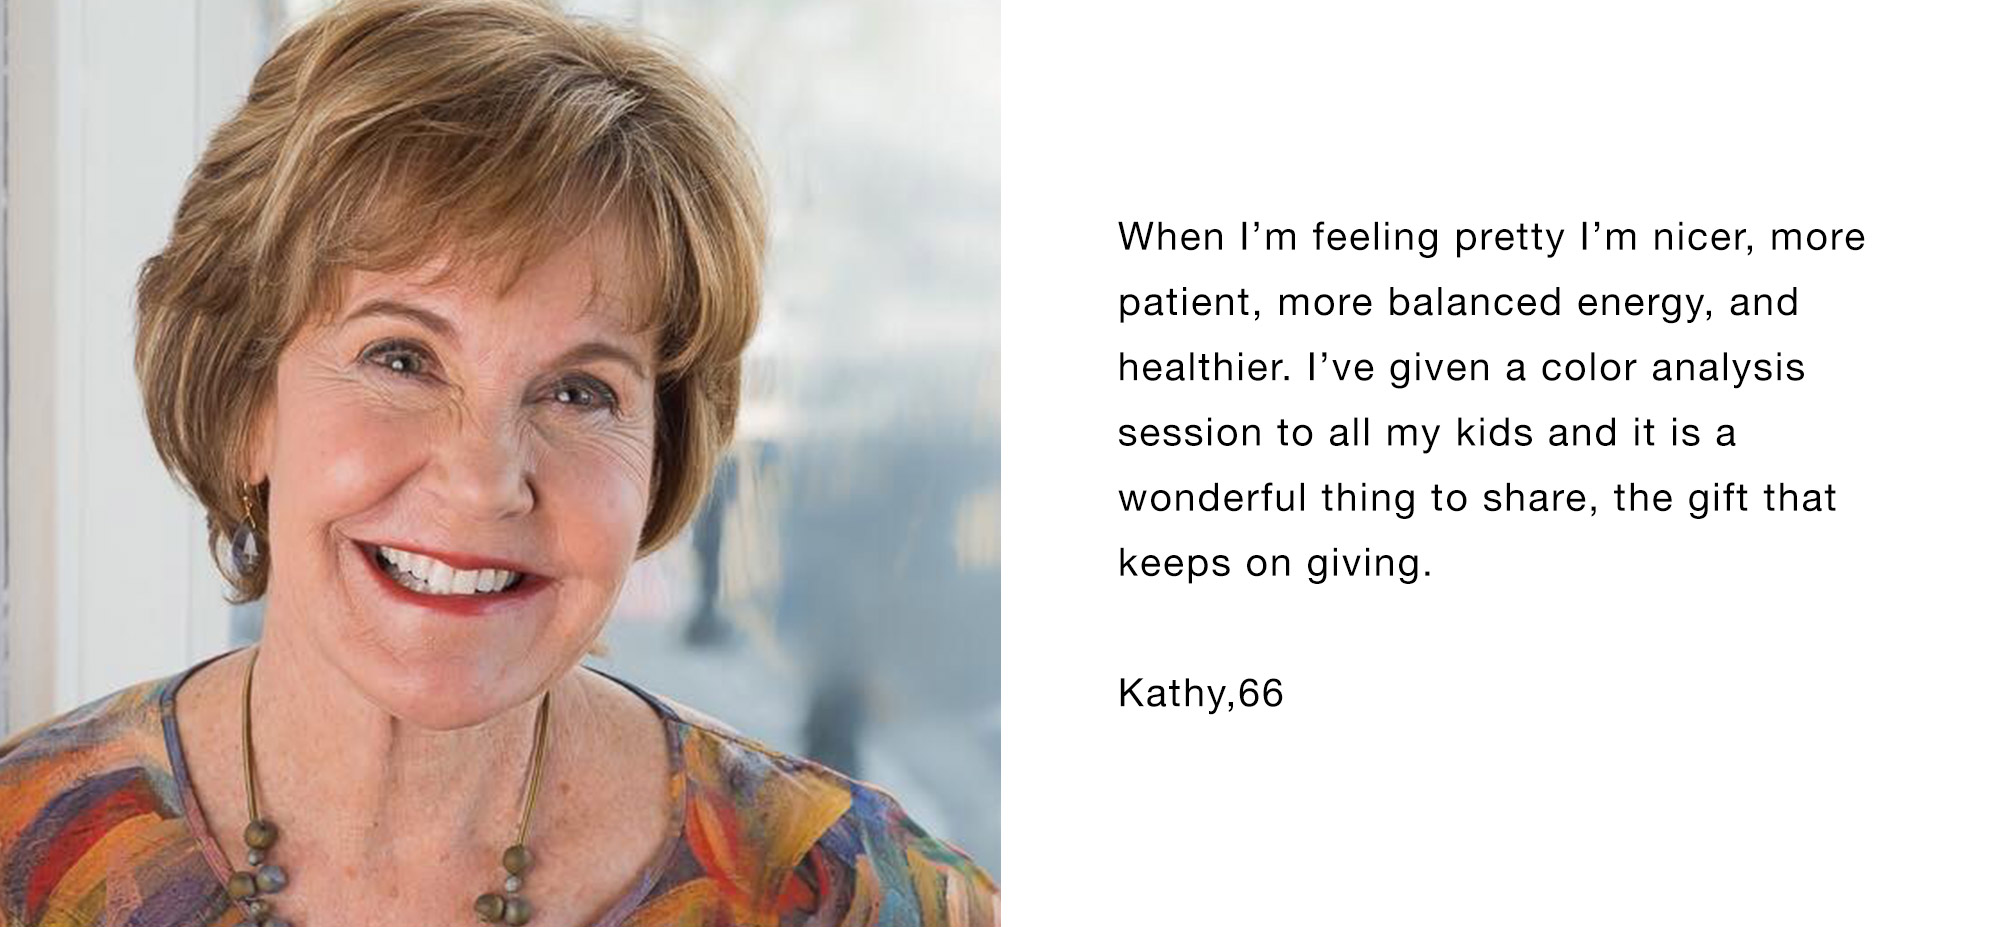 When I’m feeling pretty I’m nicer, more patient, more balanced energy, and healthier. I’ve given a color analysis session to all my kids and it is a wonderful thing to share, the gift that keeps on giving. Kathy,66